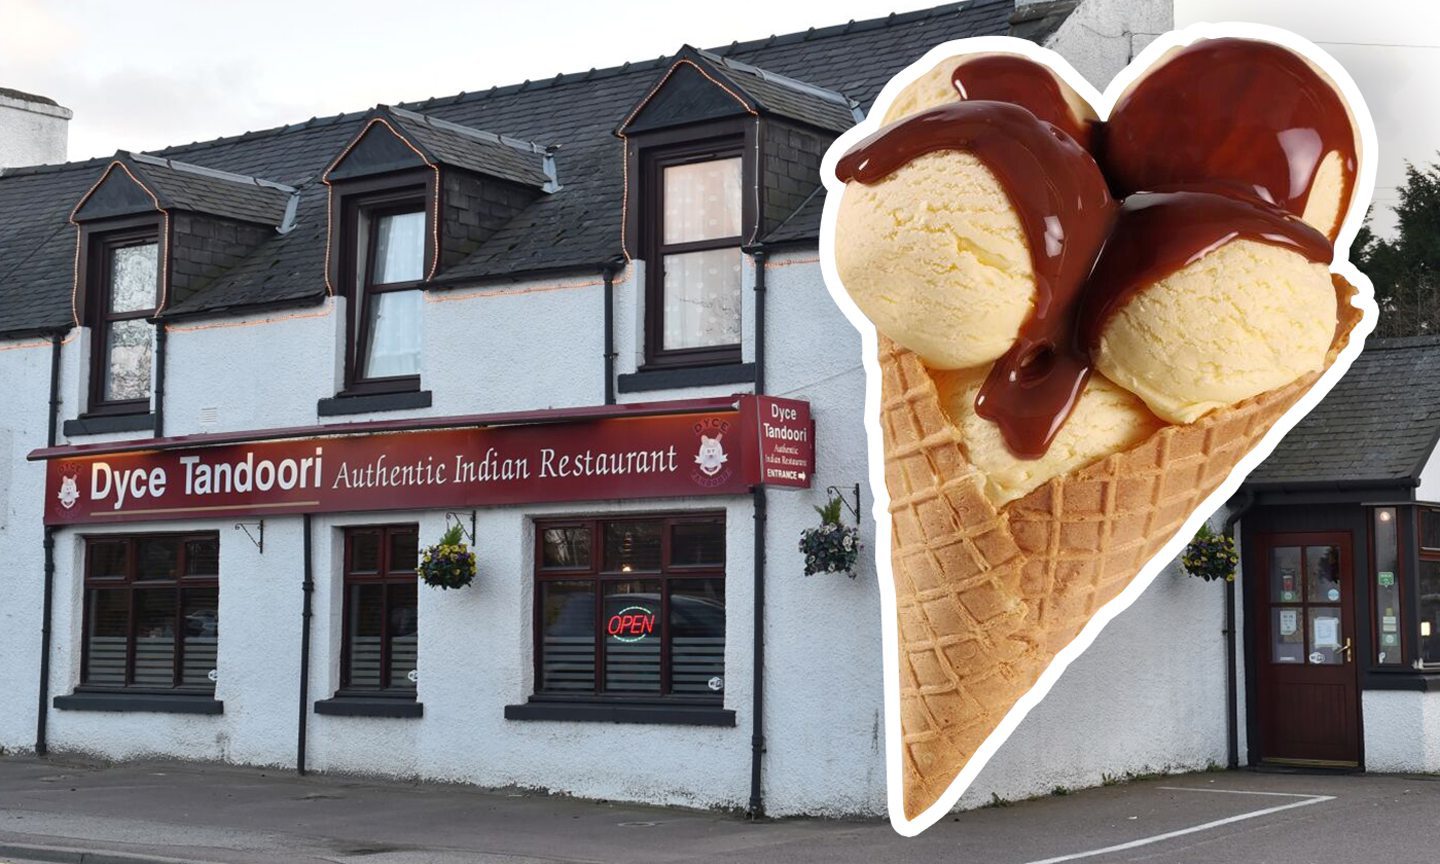 The Dyce ice cream shop could open at the Indian restaurant.